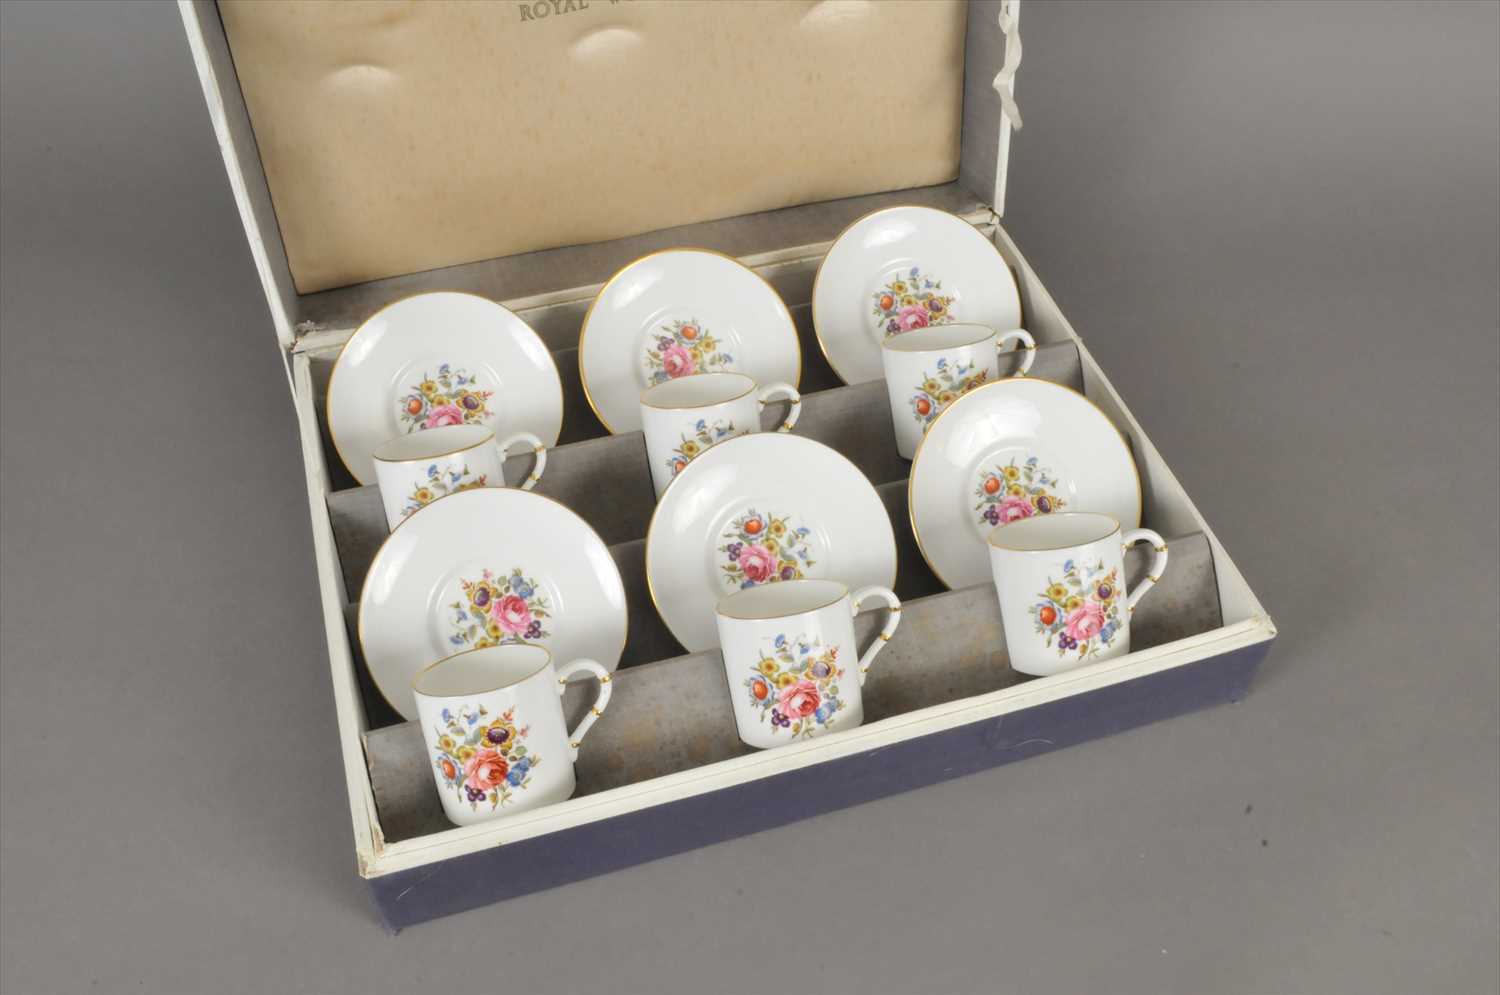 Royal Worcester coffee service